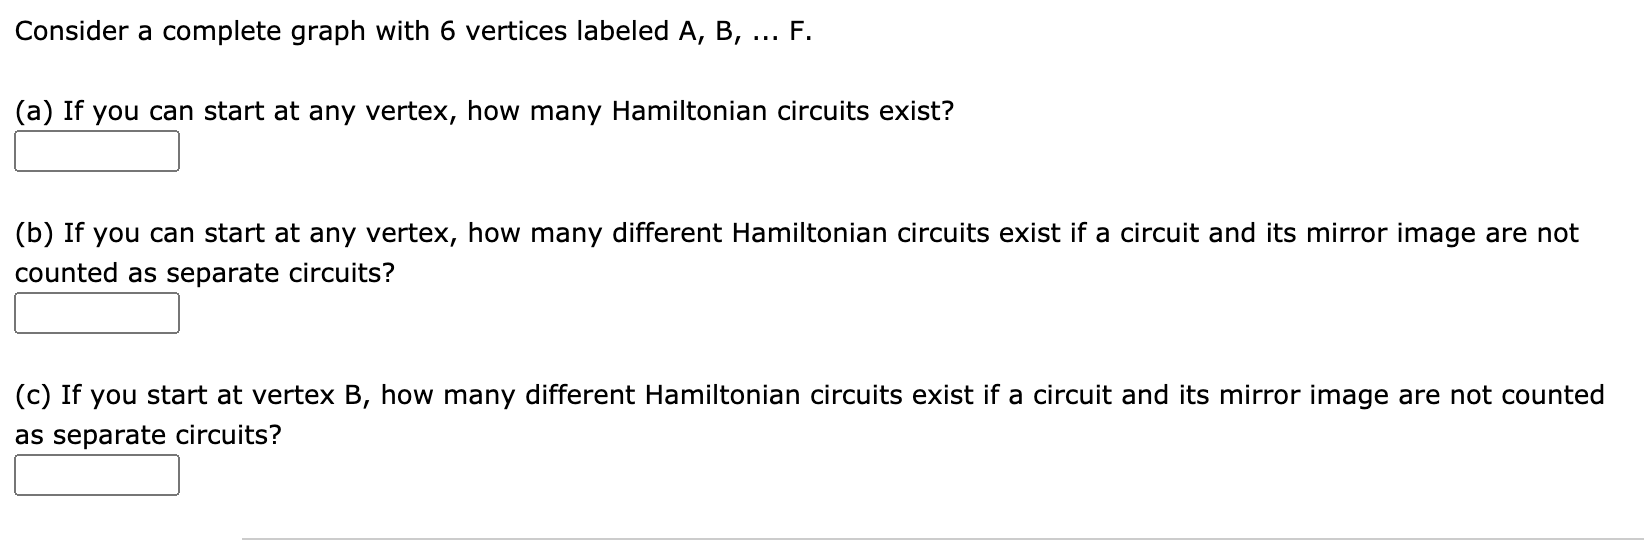 Consider a complete graph with 6 vertices labeled A, B, ... F.
(a) If you can start at any vertex, how many Hamiltonian circuits exist?
(b) If you can start at any vertex, how many different Hamiltonian circuits exist if a circuit and its mirror image are not
counted as separate circuits?
(c) If you start at vertex B, how many different Hamiltonian circuits exist if a circuit and its mirror image are not counted
as separate circuits?
